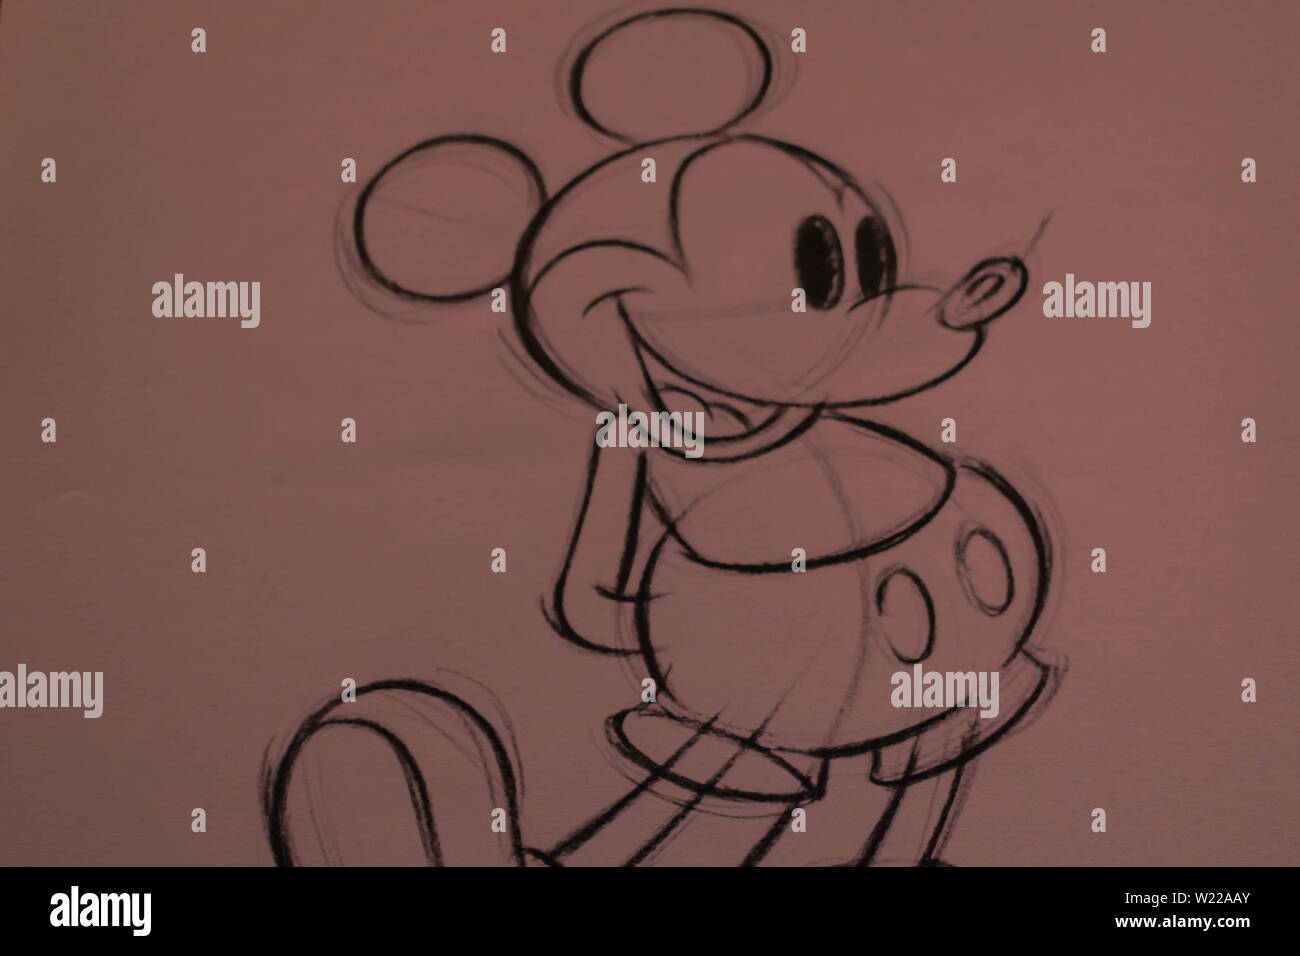 Mickey mouse pictures to draw – johnsimpkins.com | Mickey mouse drawings, Mickey  drawing, Mickey mouse drawing easy